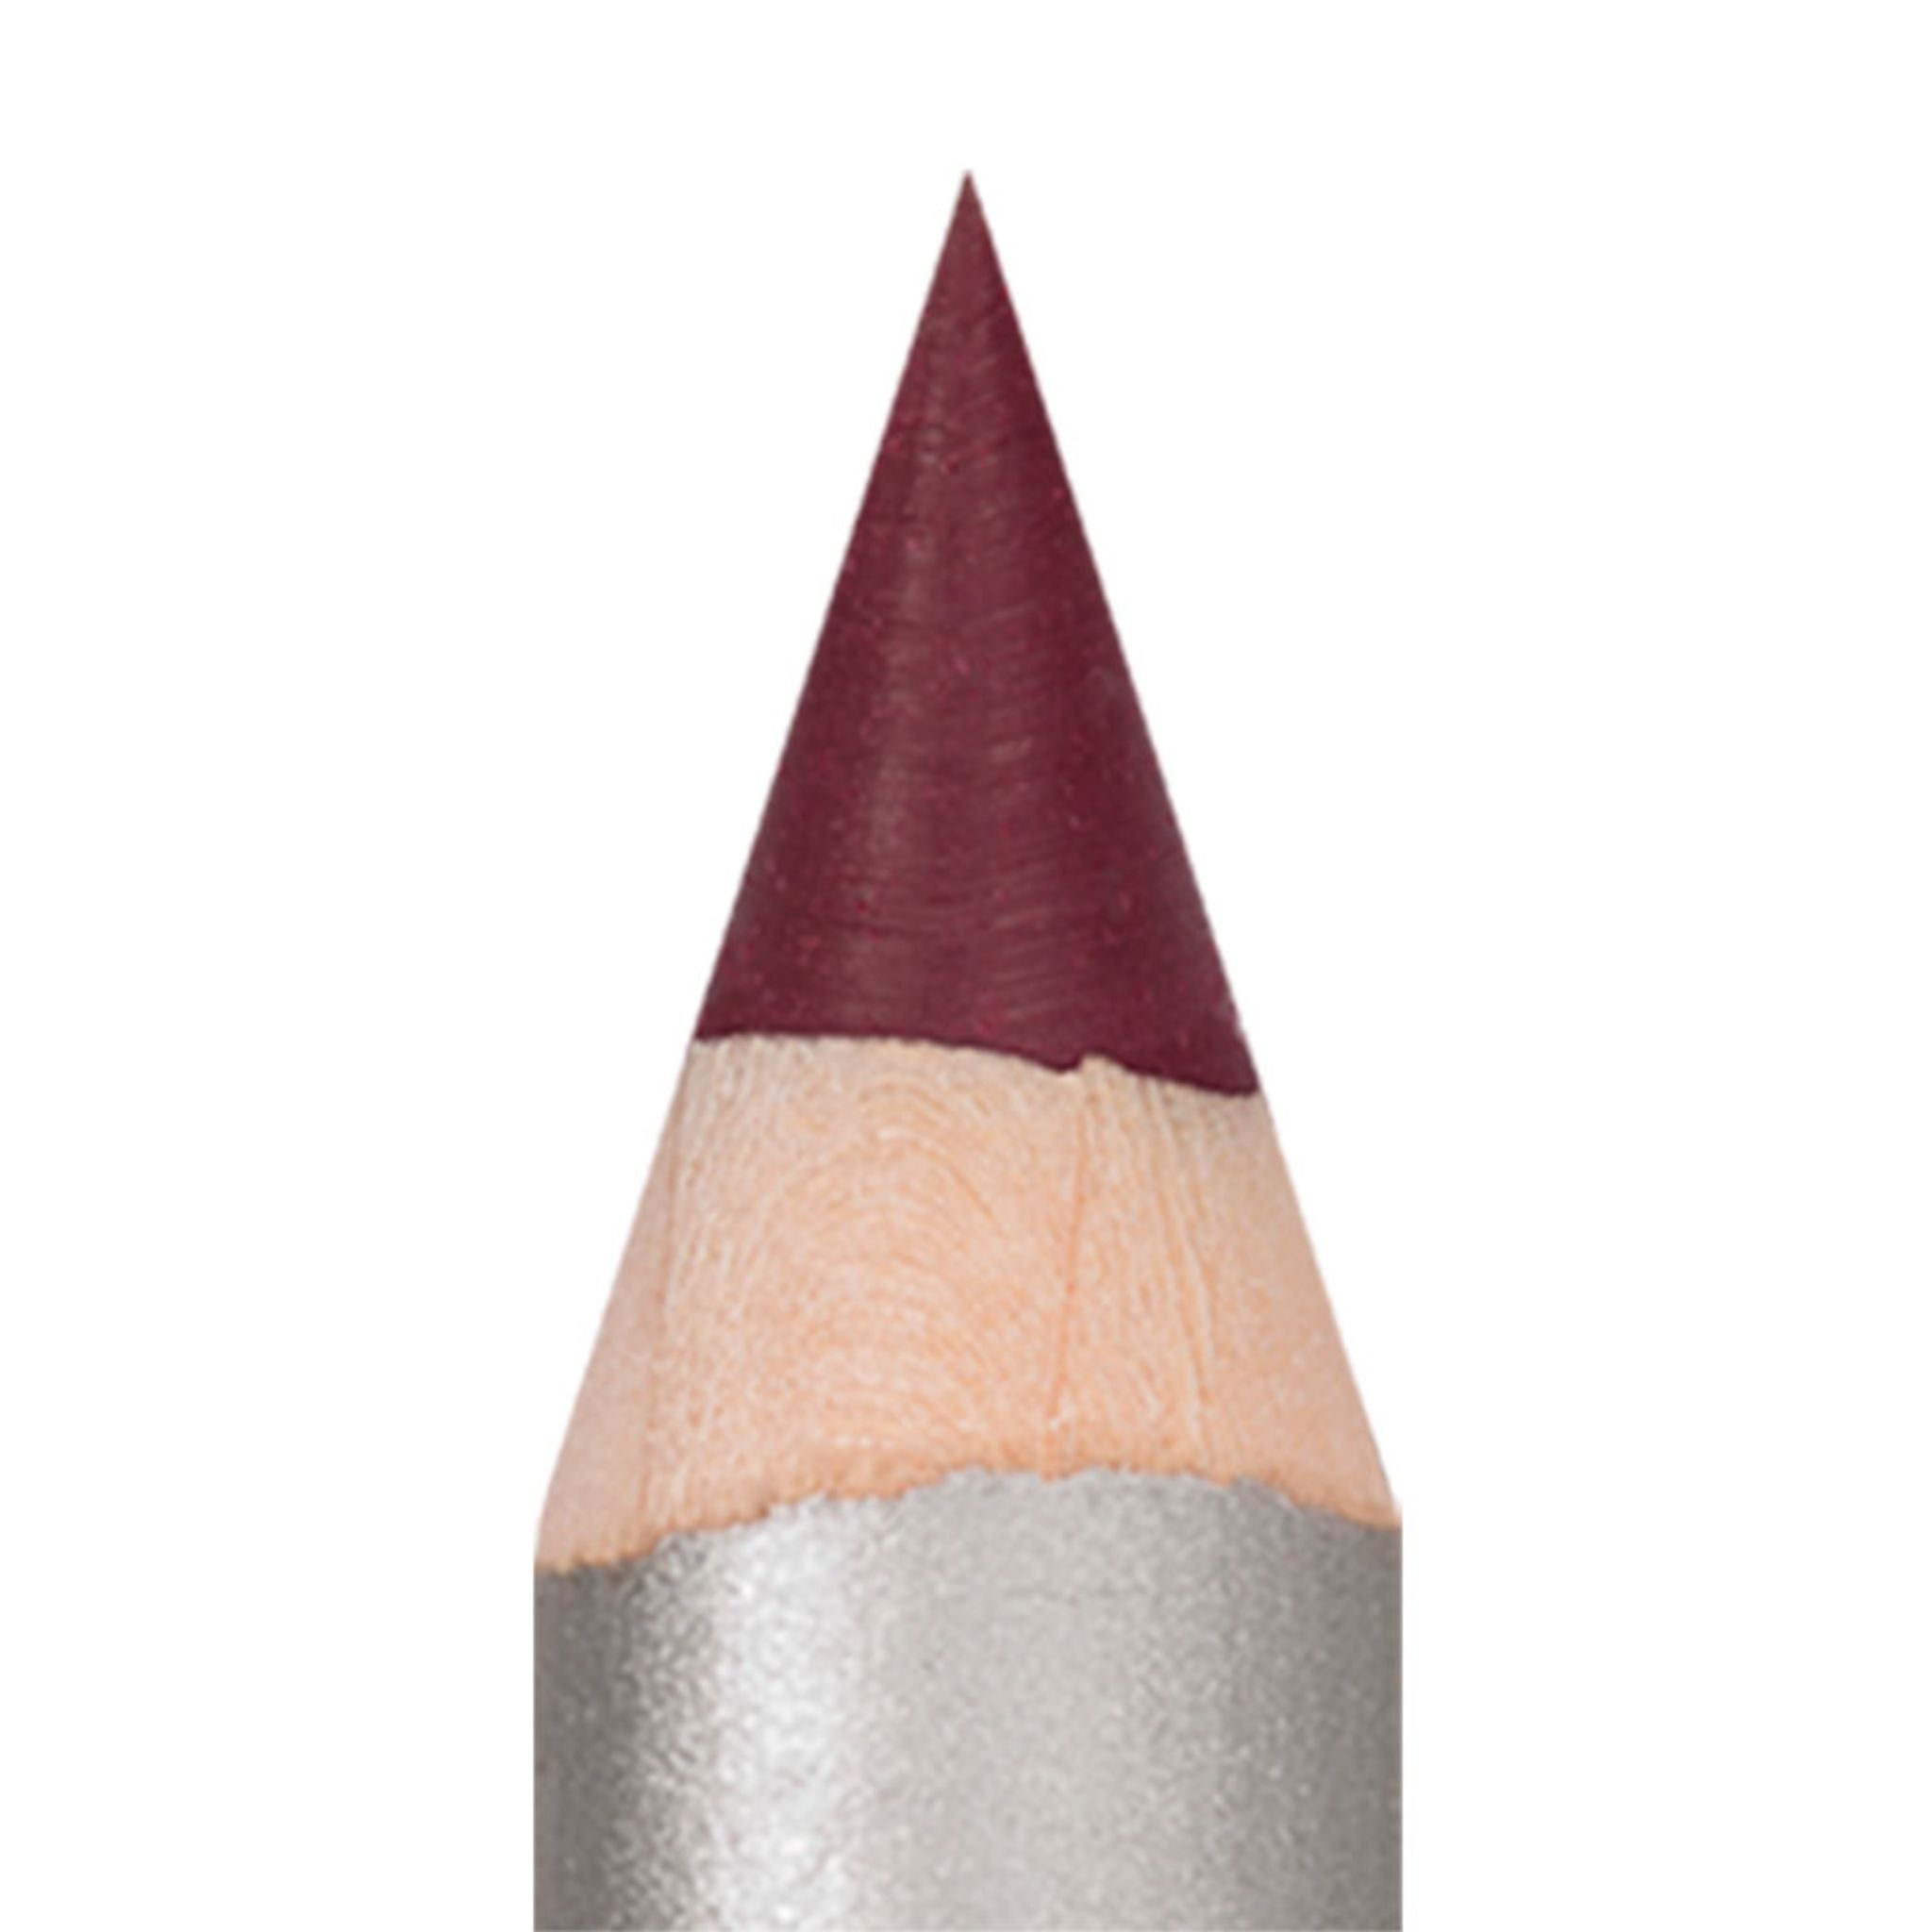 Contour pencil for lips or eyes